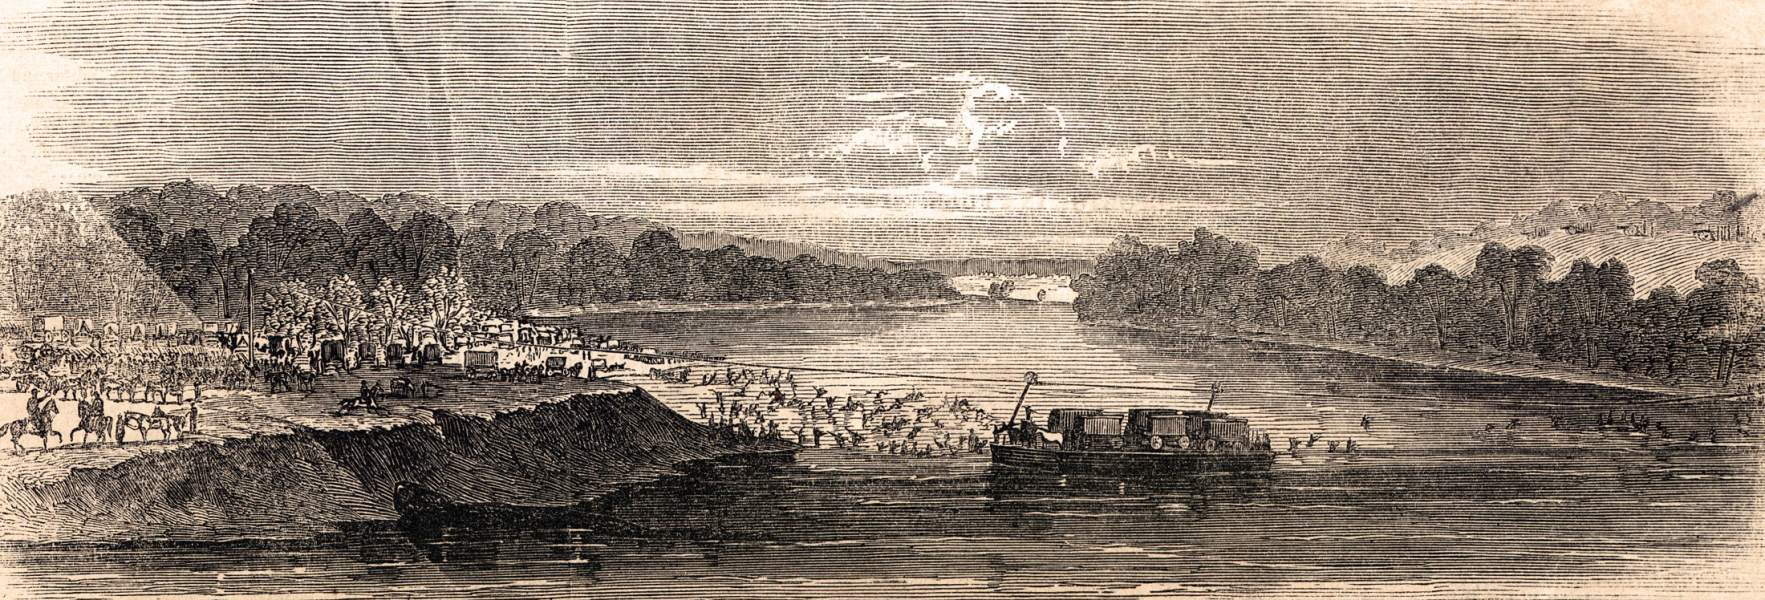 Lee's troops recrossing the Potomac, Williamsport, Maryland, night of July 13-14, 1863, artist's impression, zoomable image